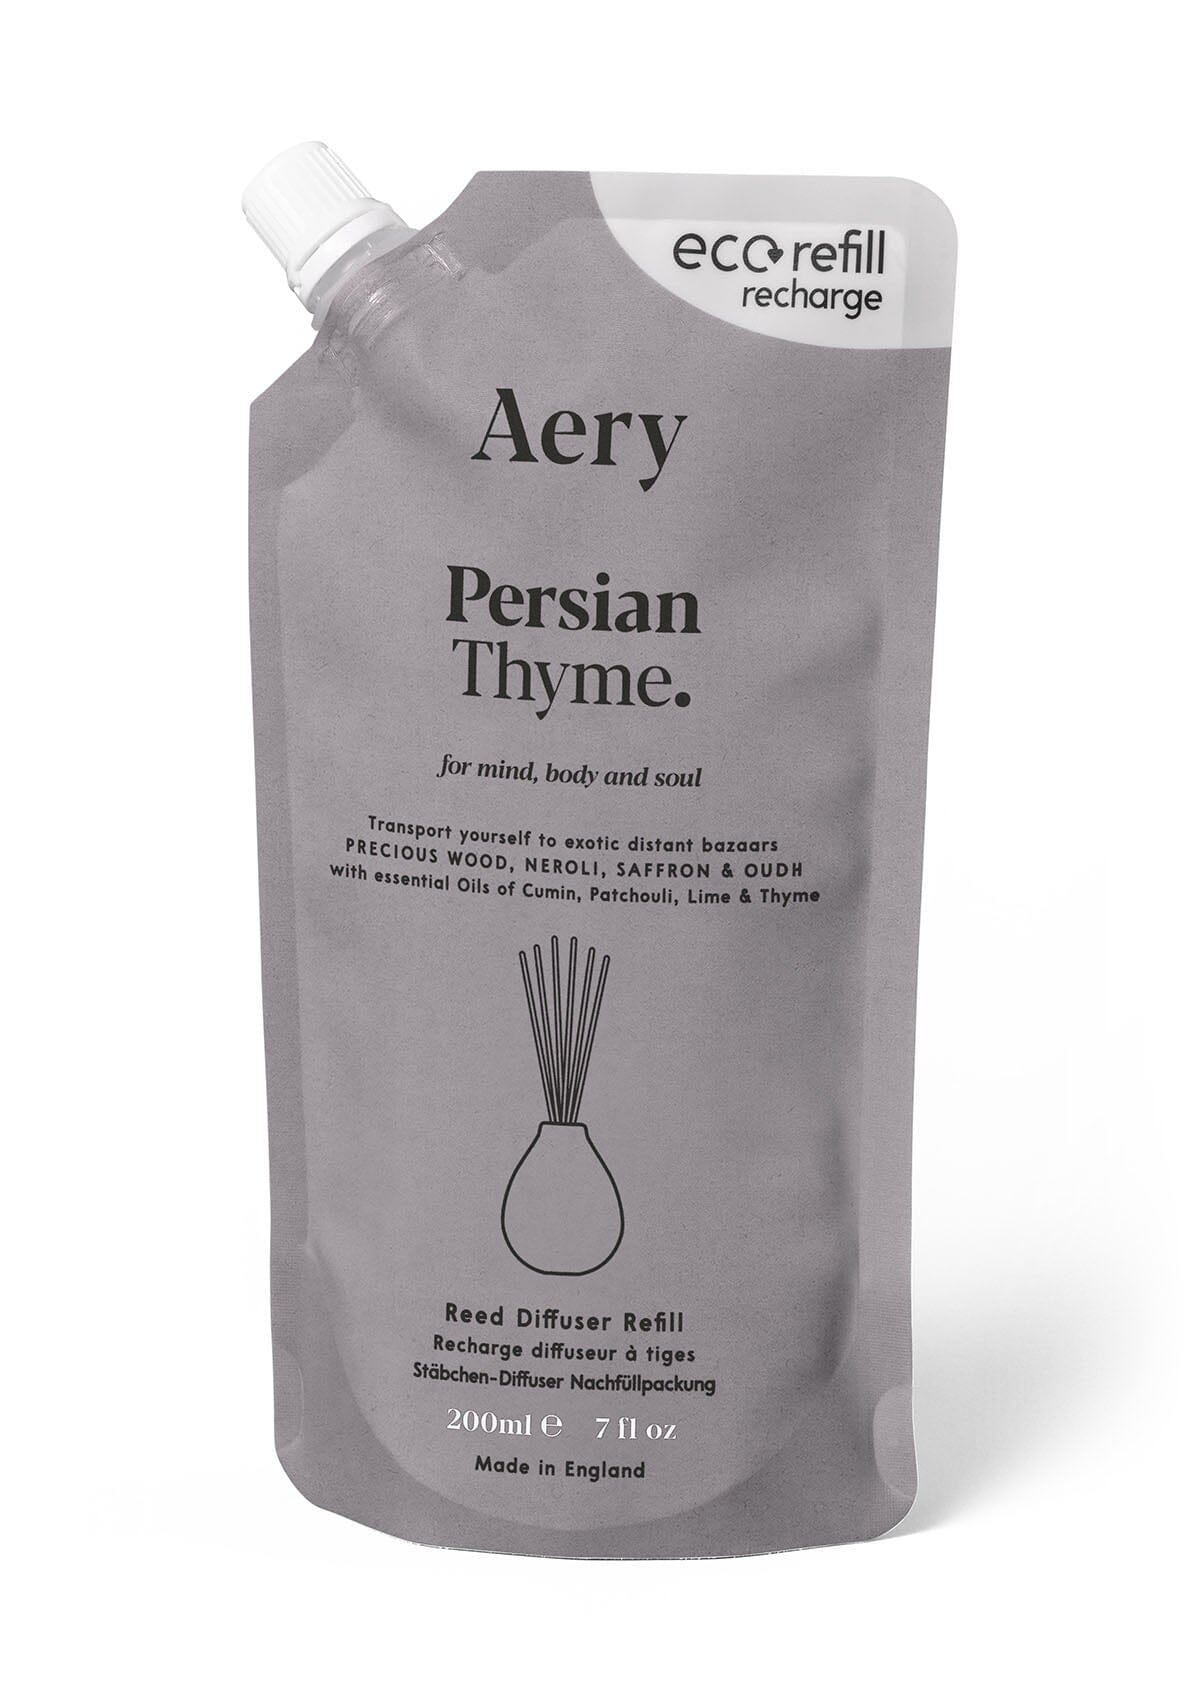 Grey Persian Thyme reed diffuser refill pouch by aery displayed on white background 